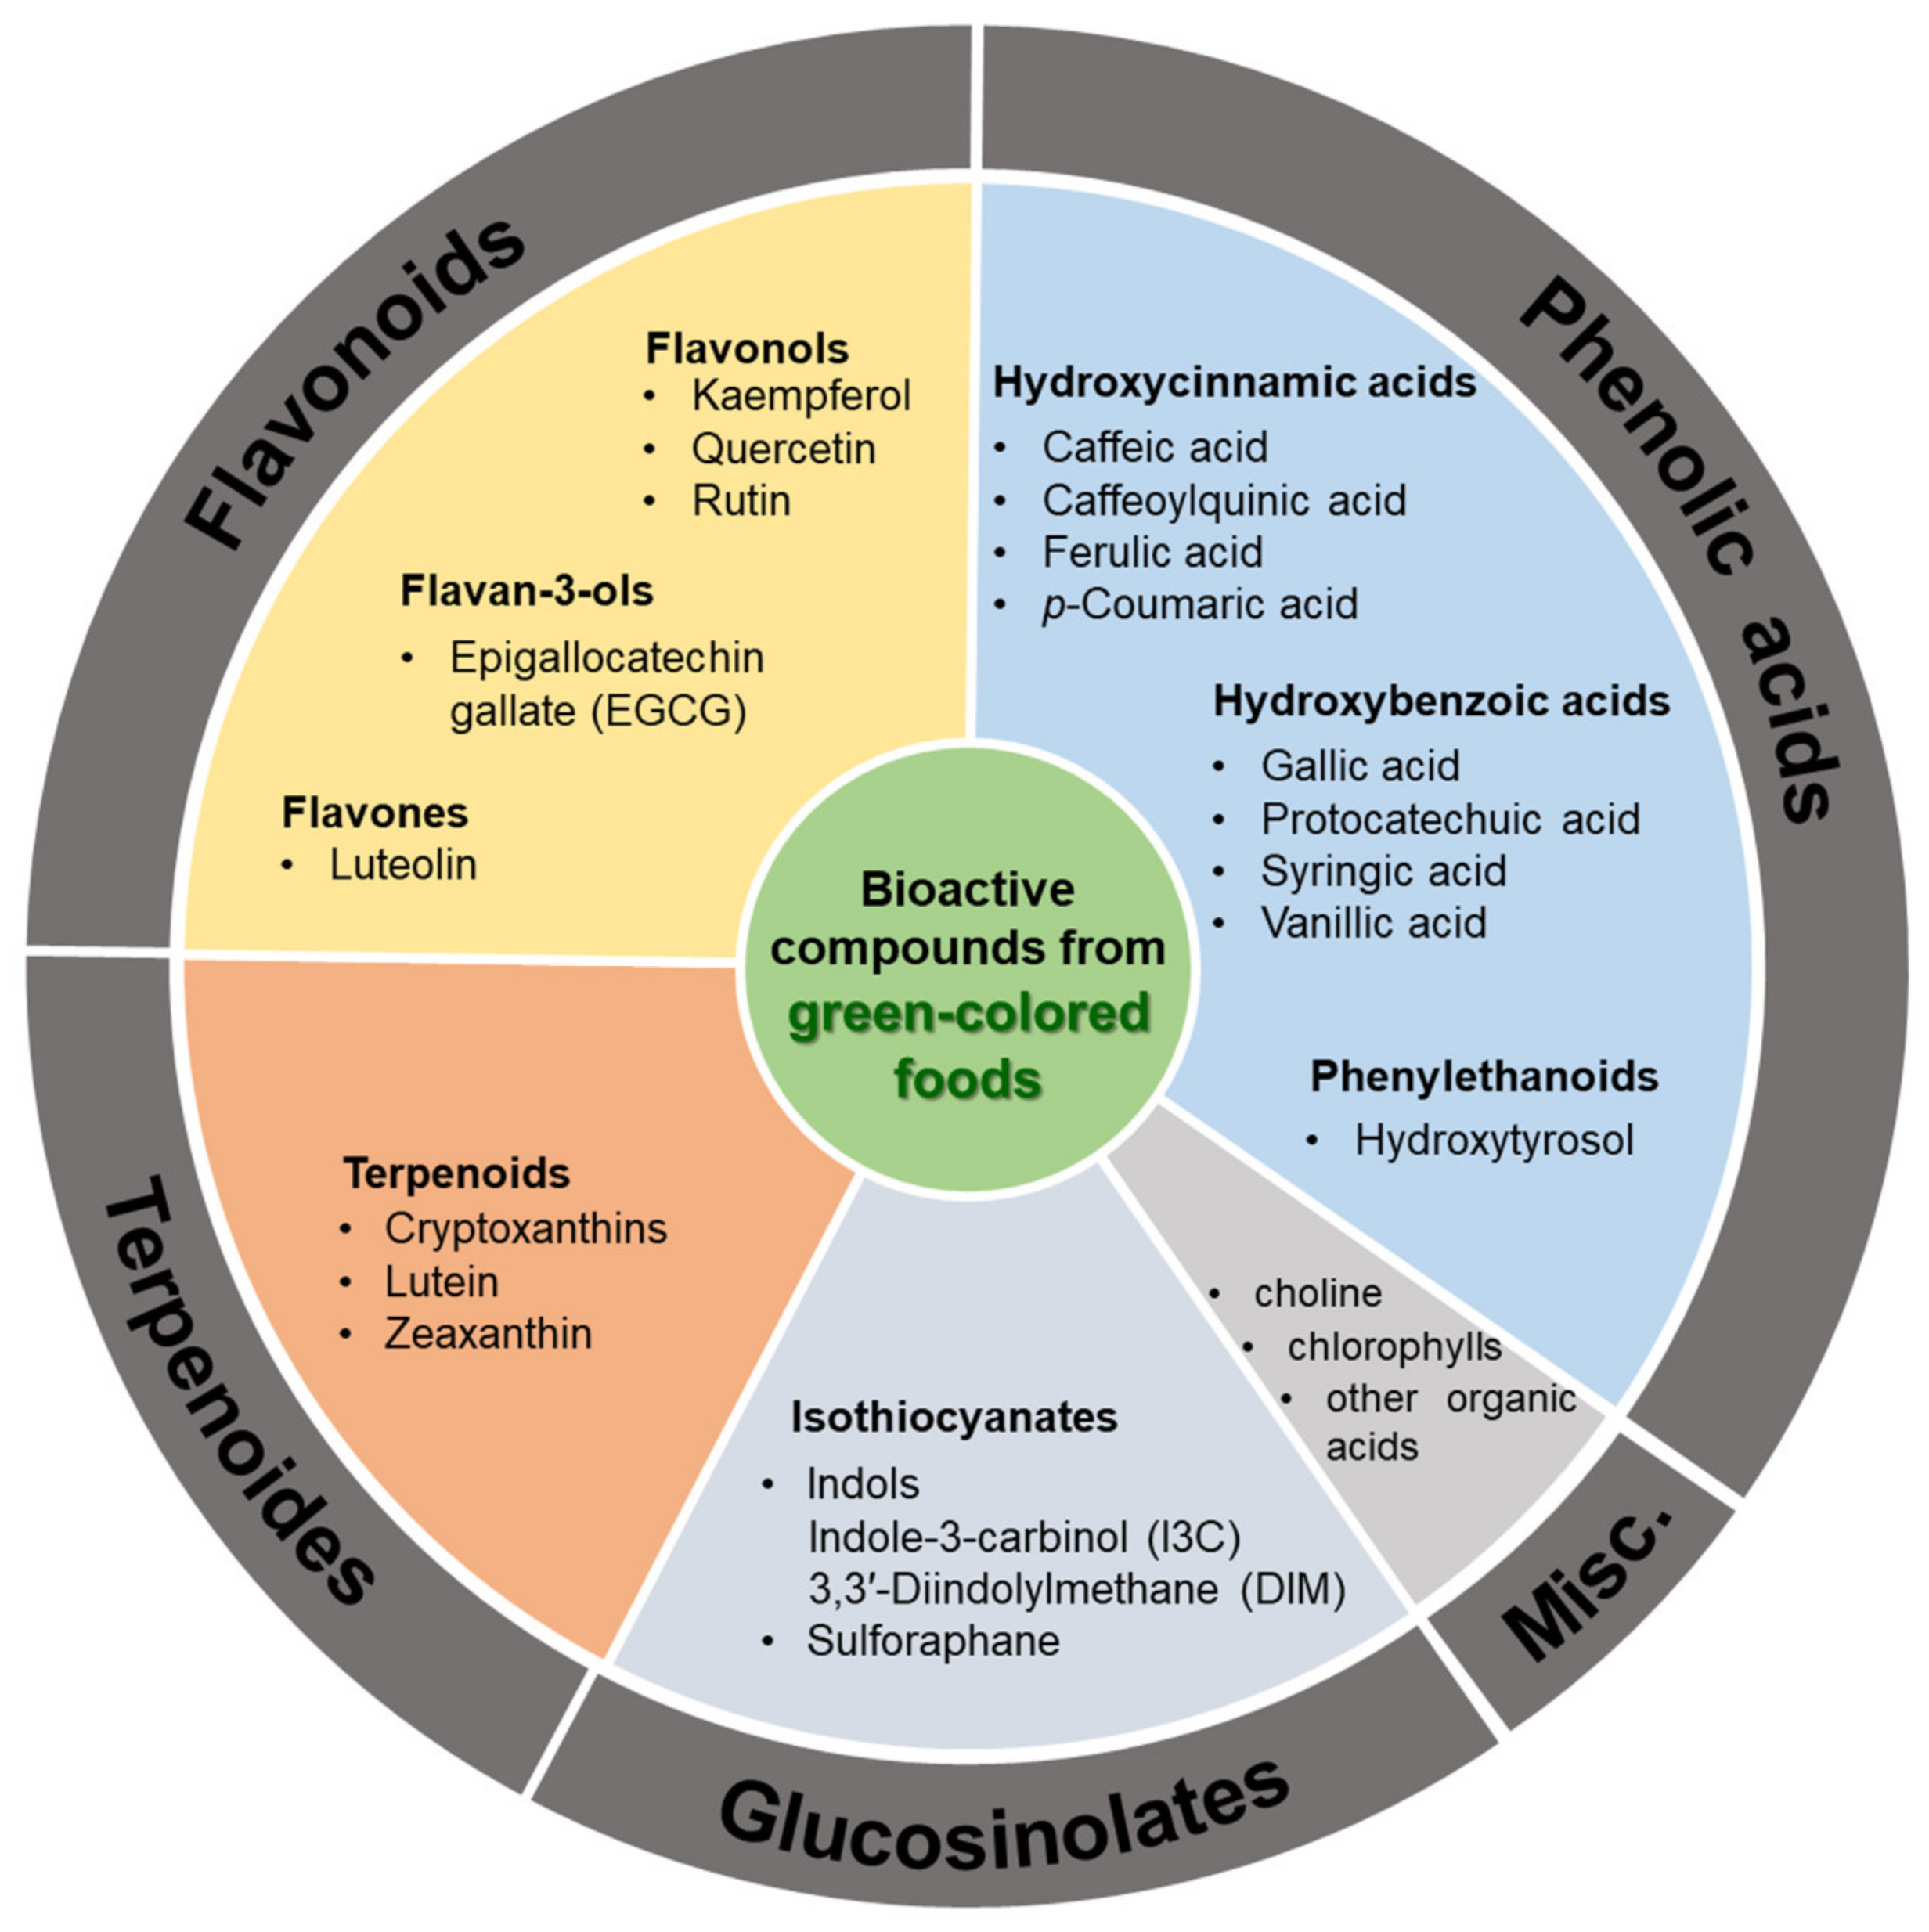 Applied Sciences | Free Full-Text | Physiological Effects of Green-Colored  Food-Derived Bioactive Compounds on Cardiovascular and Metabolic Diseases